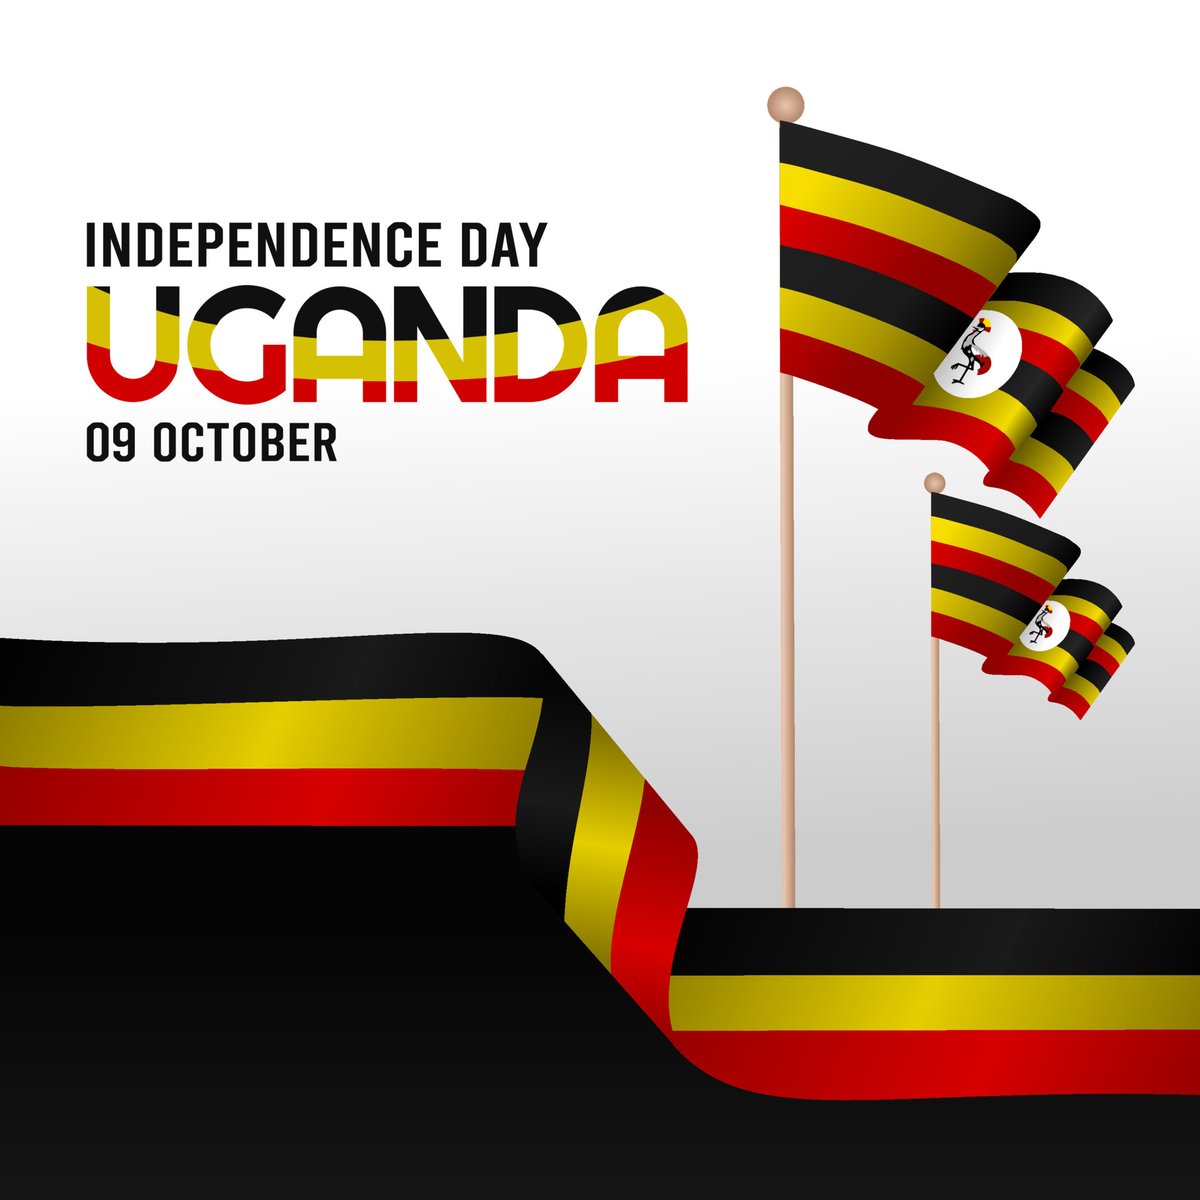 Happy independence day to all Ugandans!